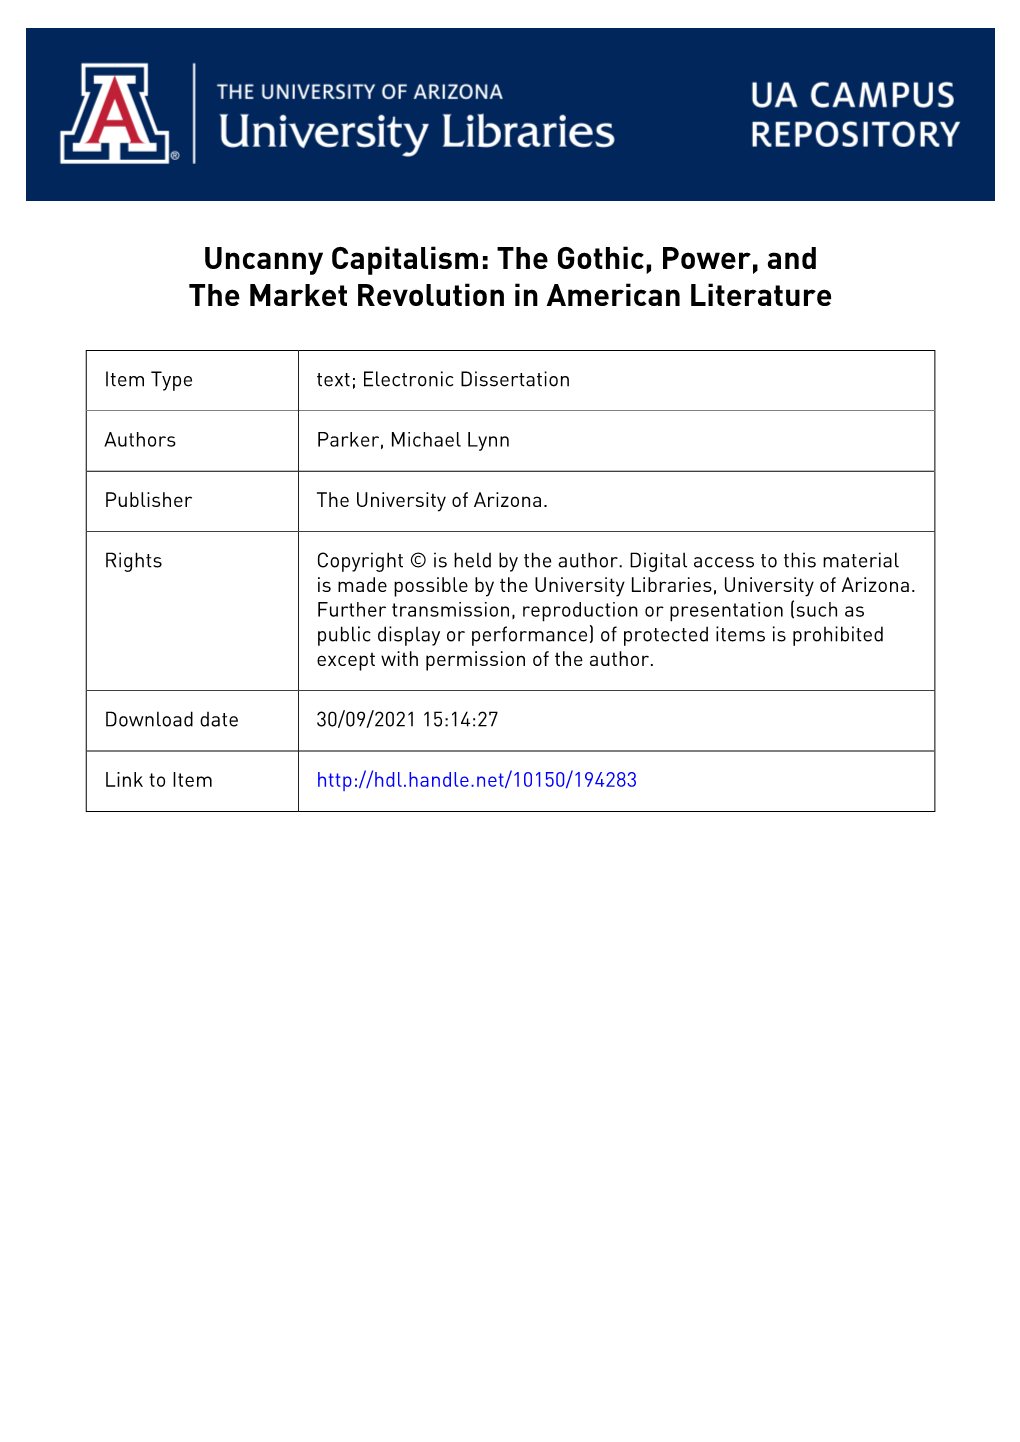 Uncanny Capitalism: the Gothic, Power, and the Market Revolution in American Literature